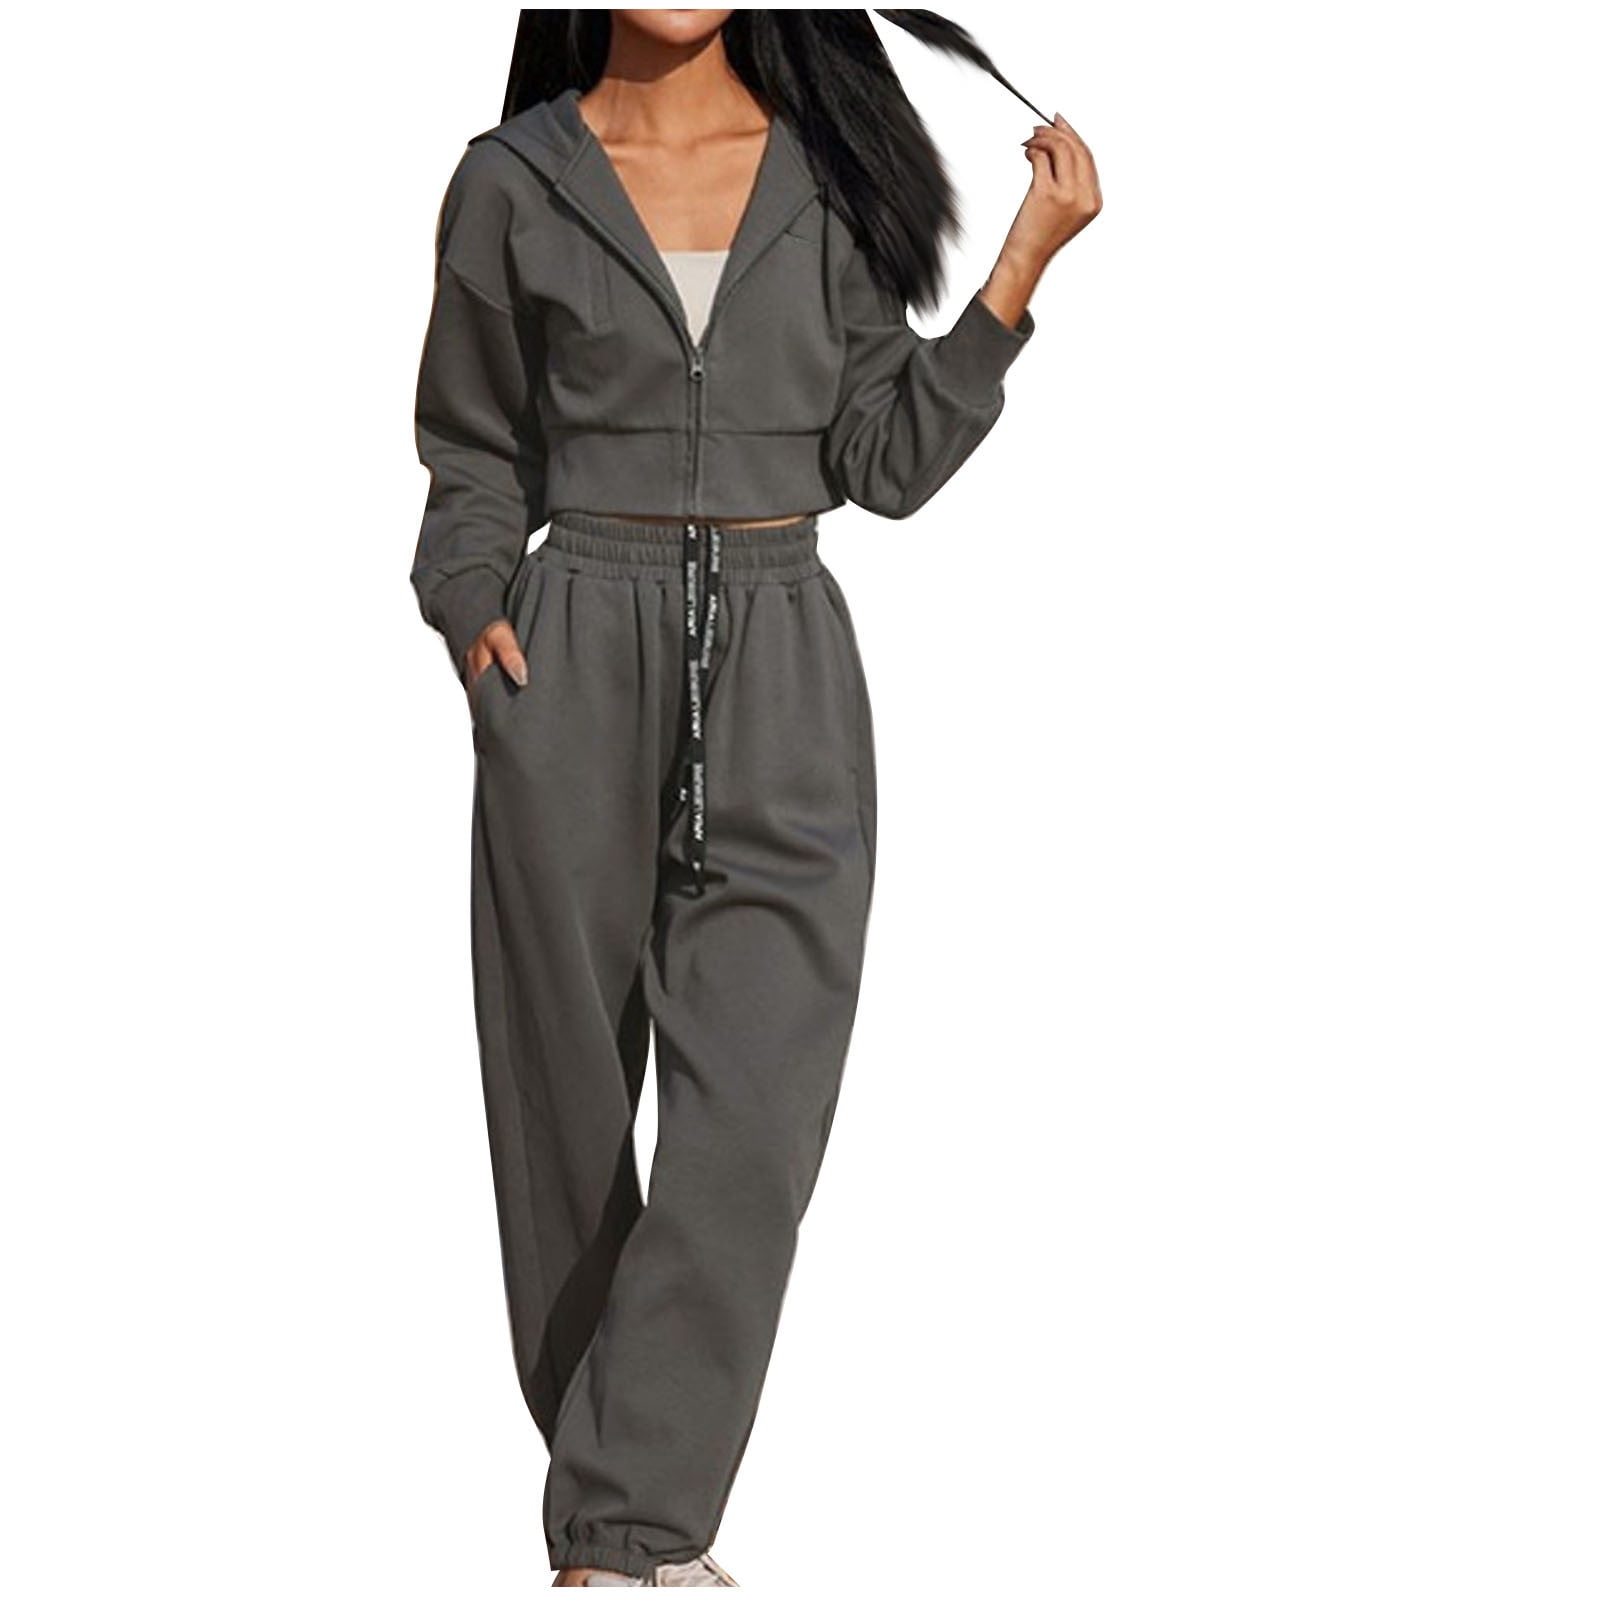 RQYYD Lounge Sets for Women 2 Piece Outfits Hoodie Sweatshirt Tracksuit  Crop Top Jogger Sweatpants Y2K Sweatsuit Set Matching Sets for Summer 